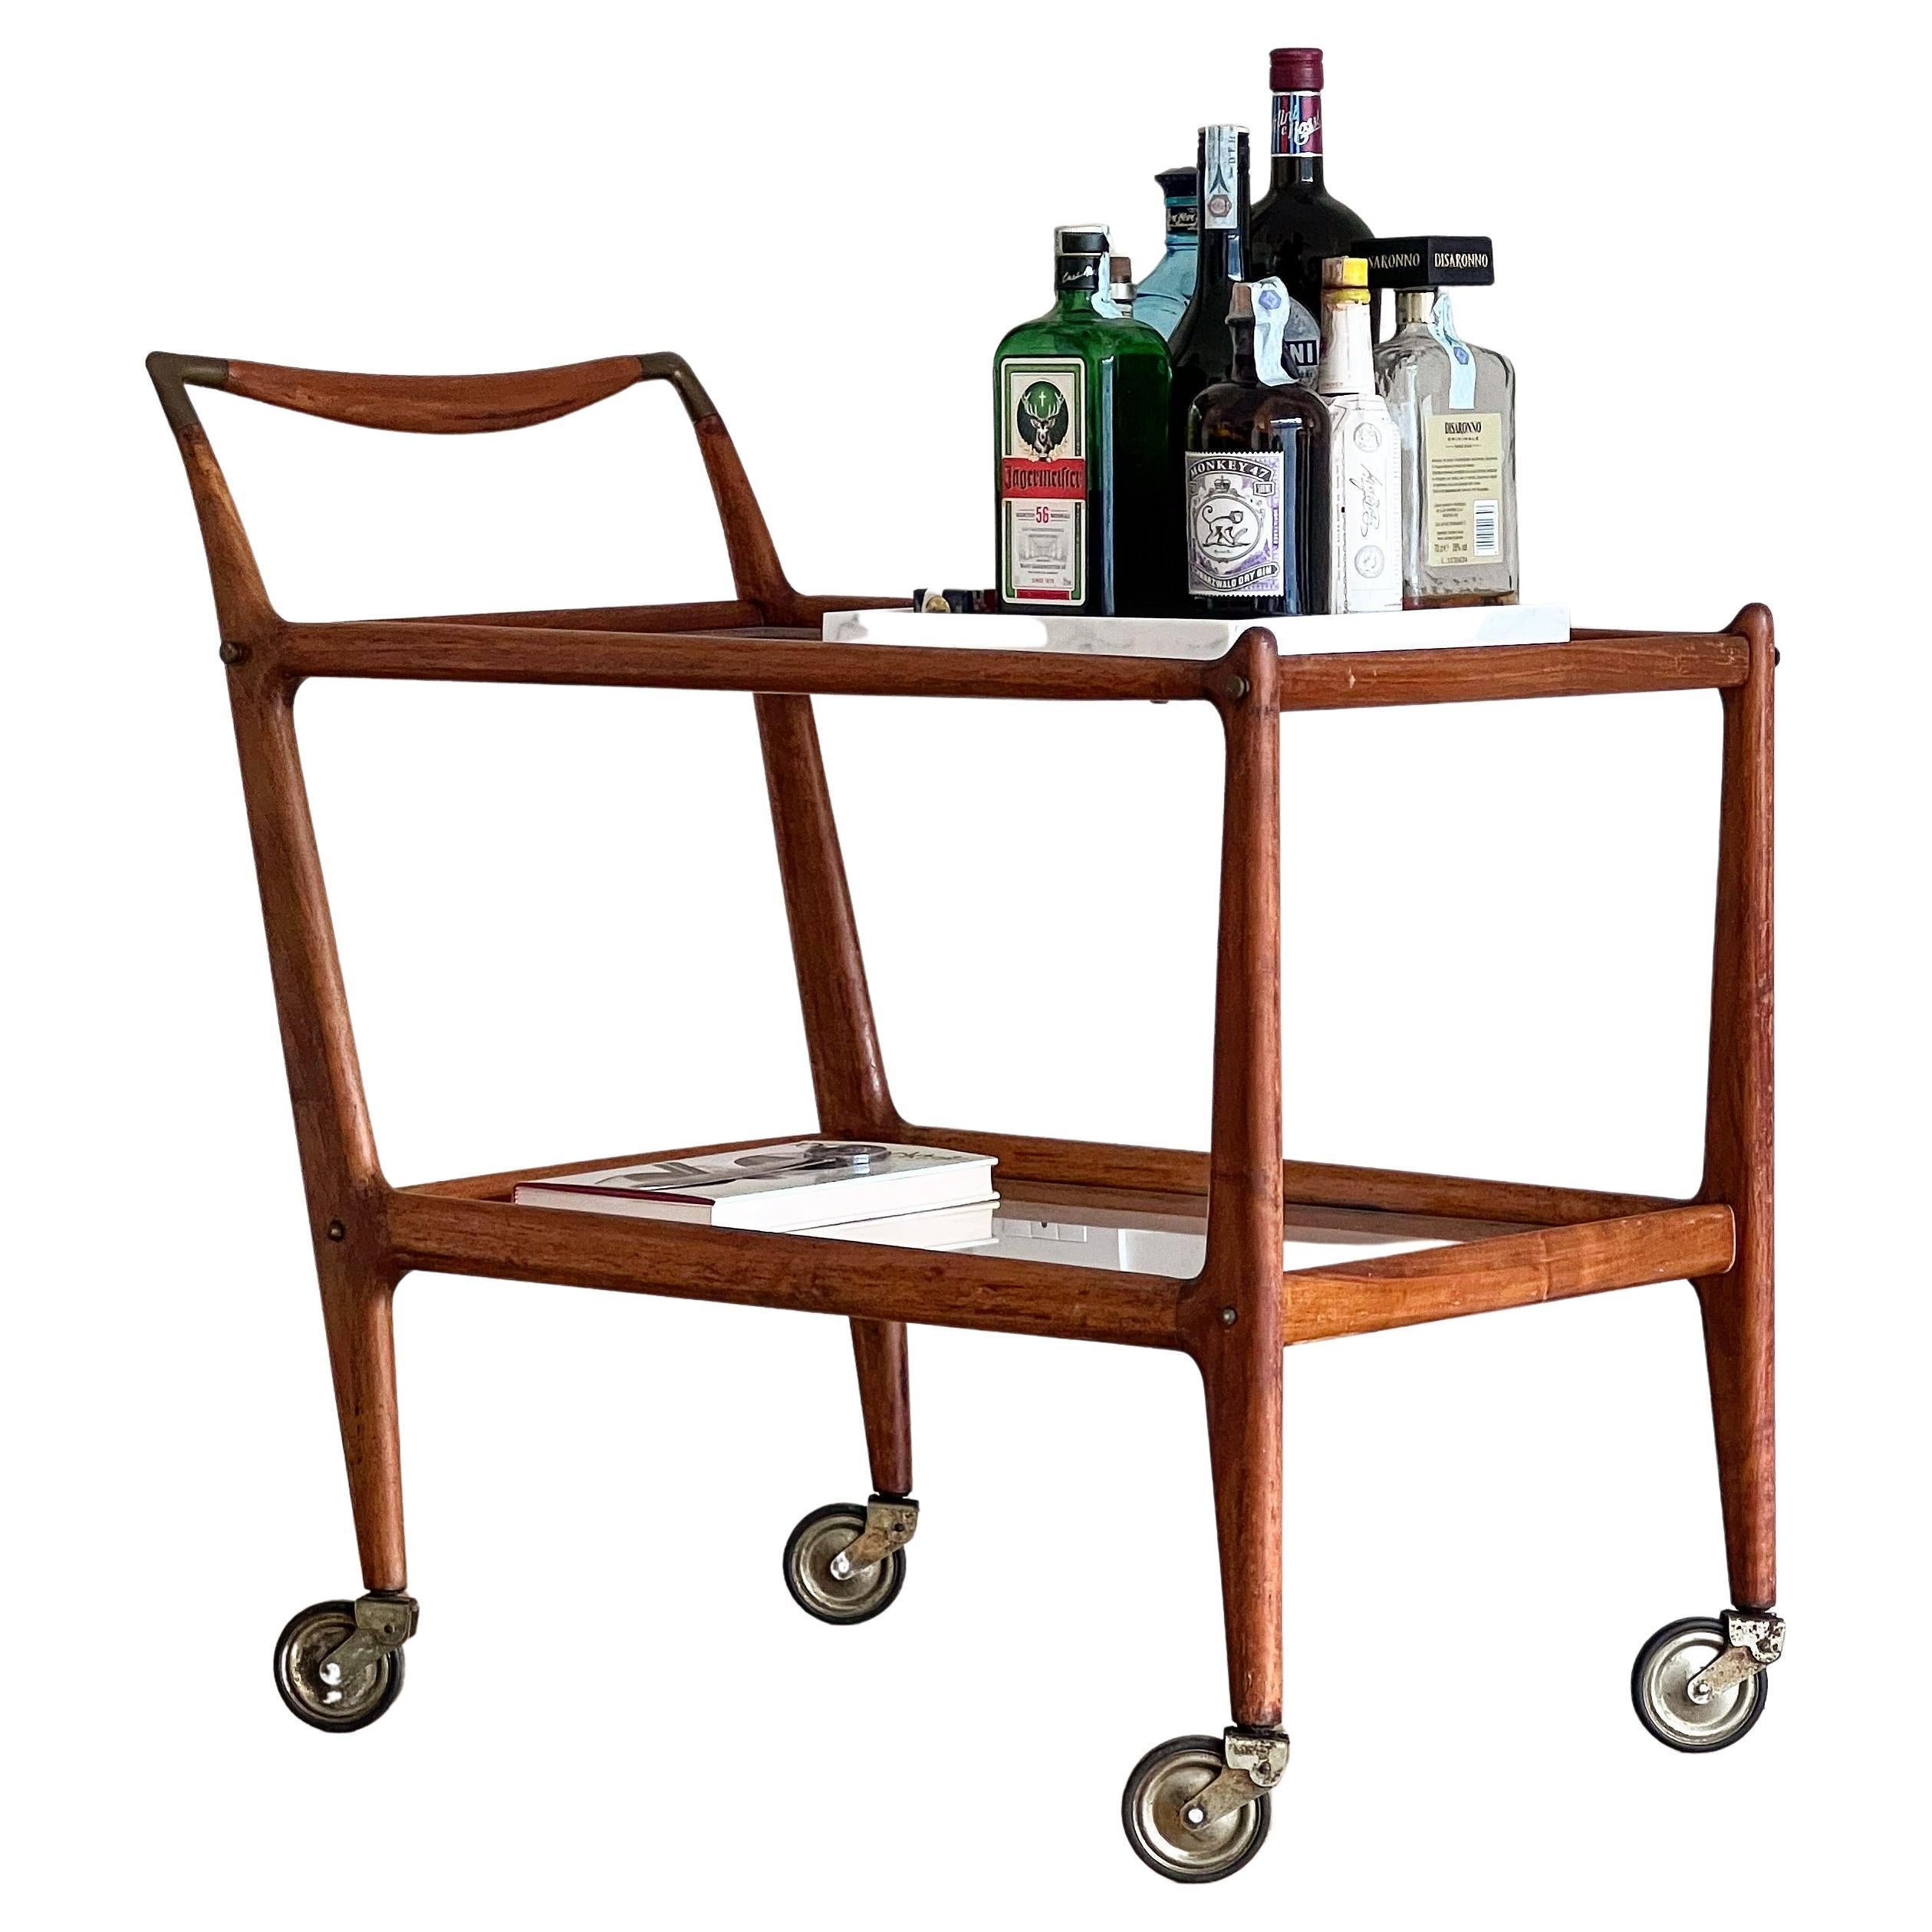 Vintage italian "Number 58" wood and glass bar cart by Ico Parisi for De Baggis For Sale